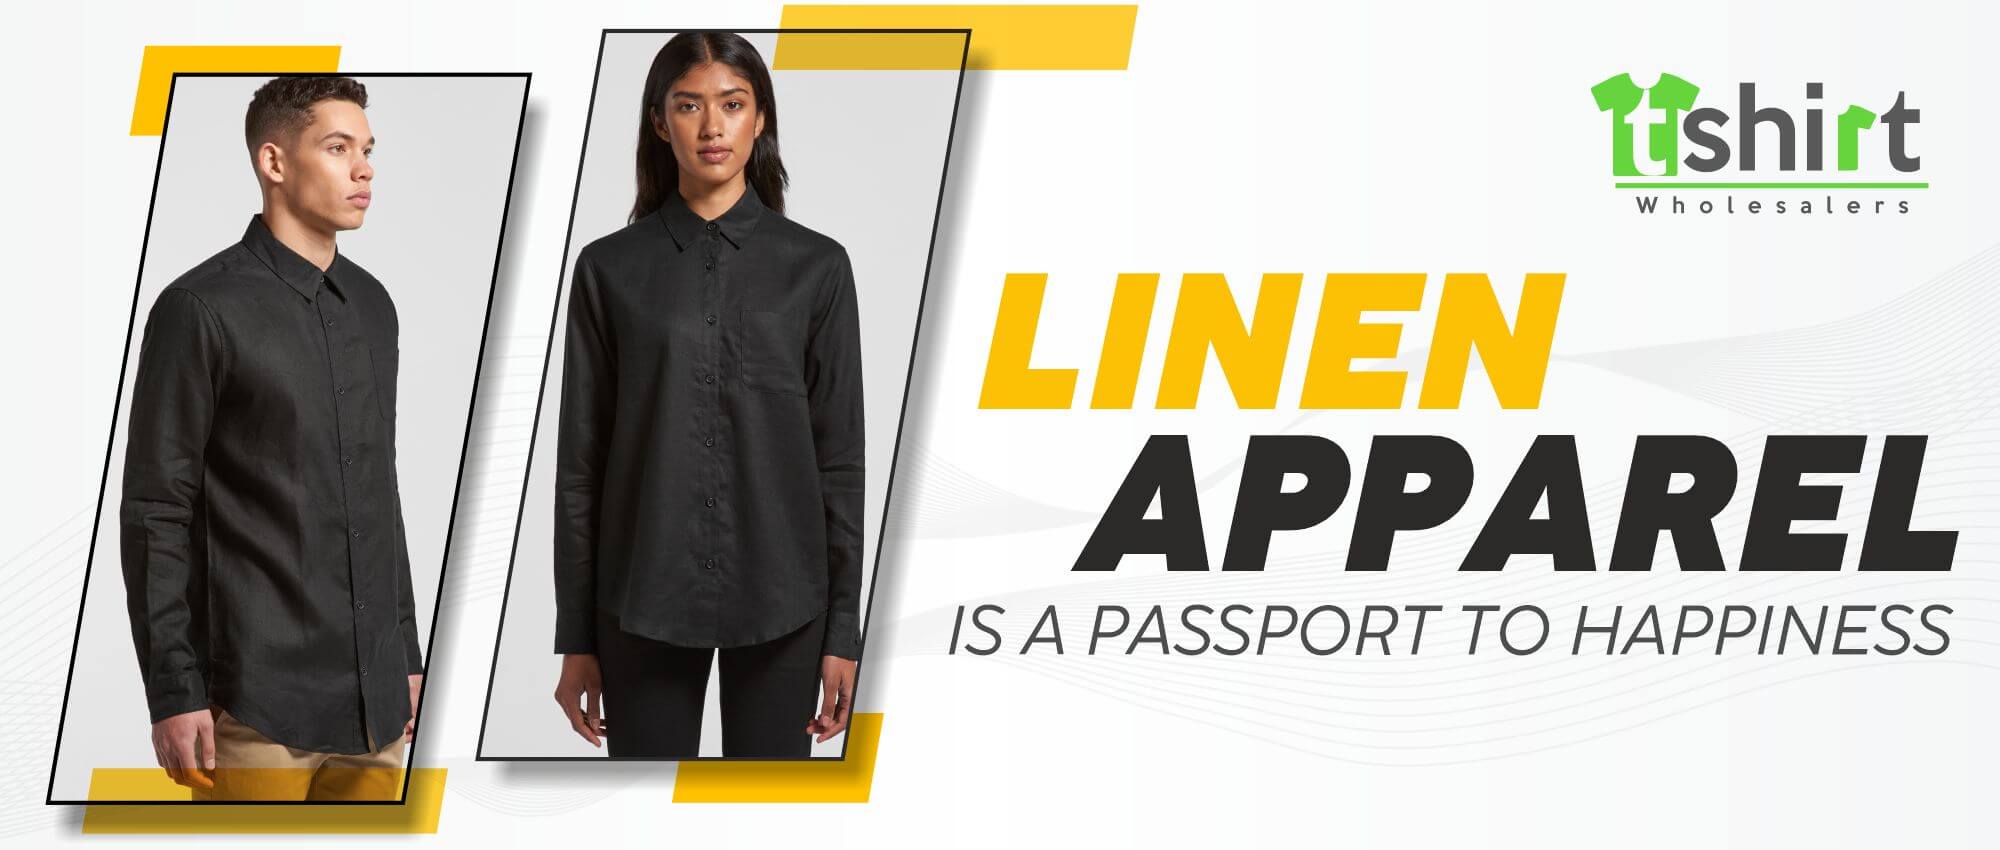 LINEN APPAREL IS A PASSPORT TO HAPPINESS